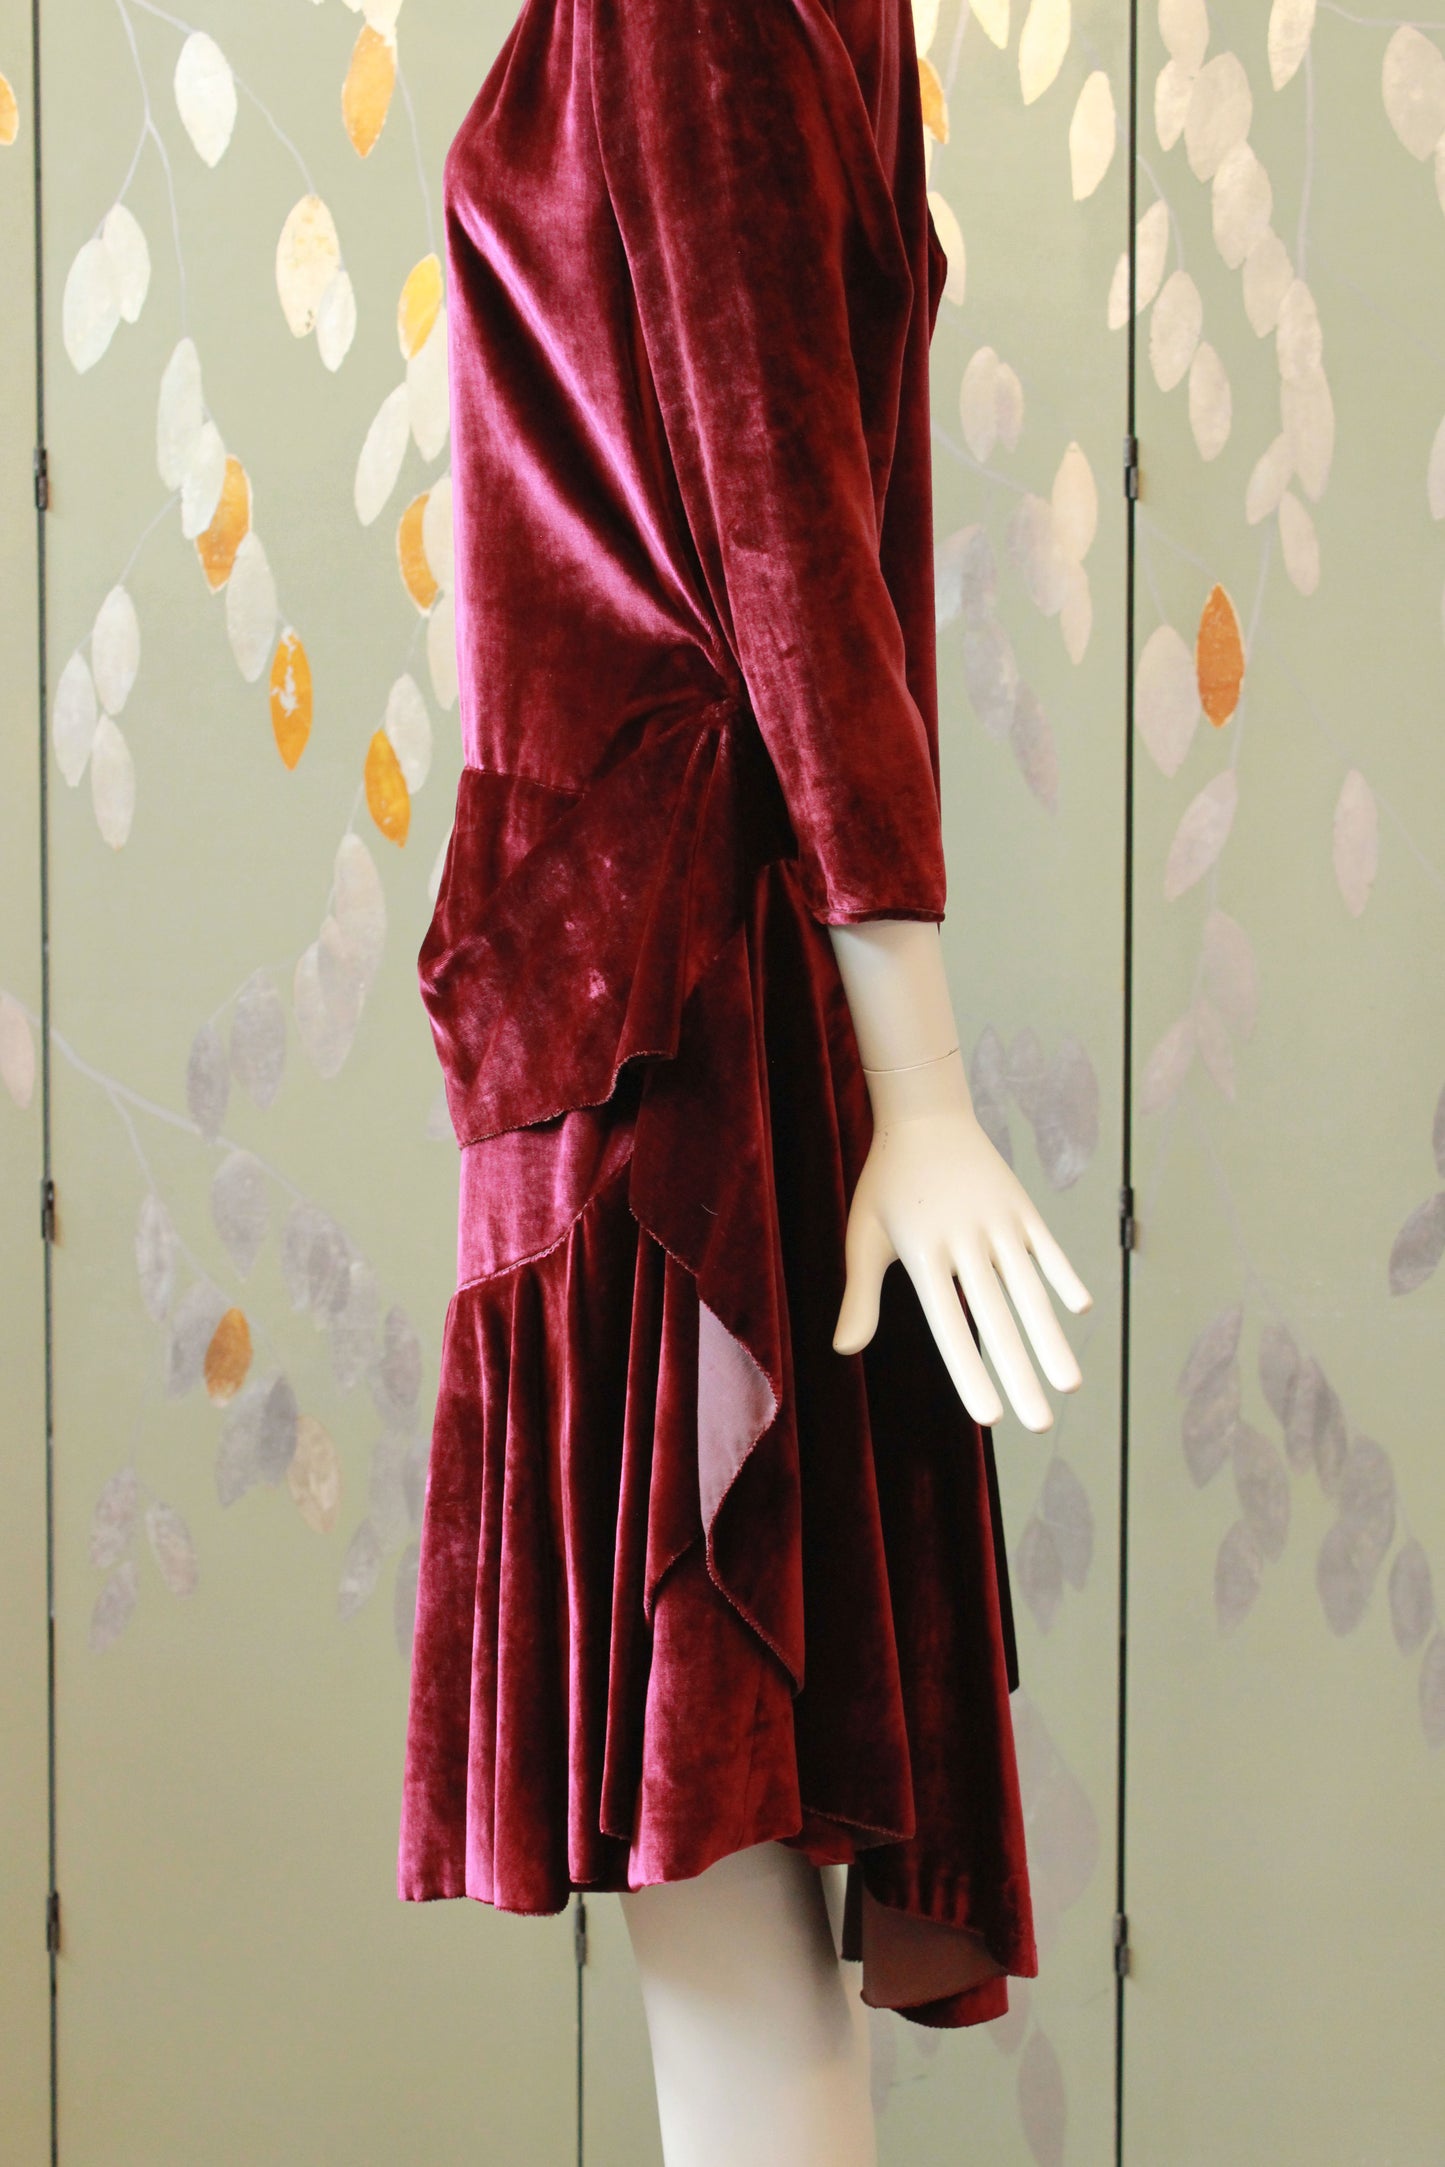 Antique 1920s Burgundy Velvet Dress with Bow and Ruffle, XS, Flapper Winter Dress, Red Wine Dress, Wounded Bird